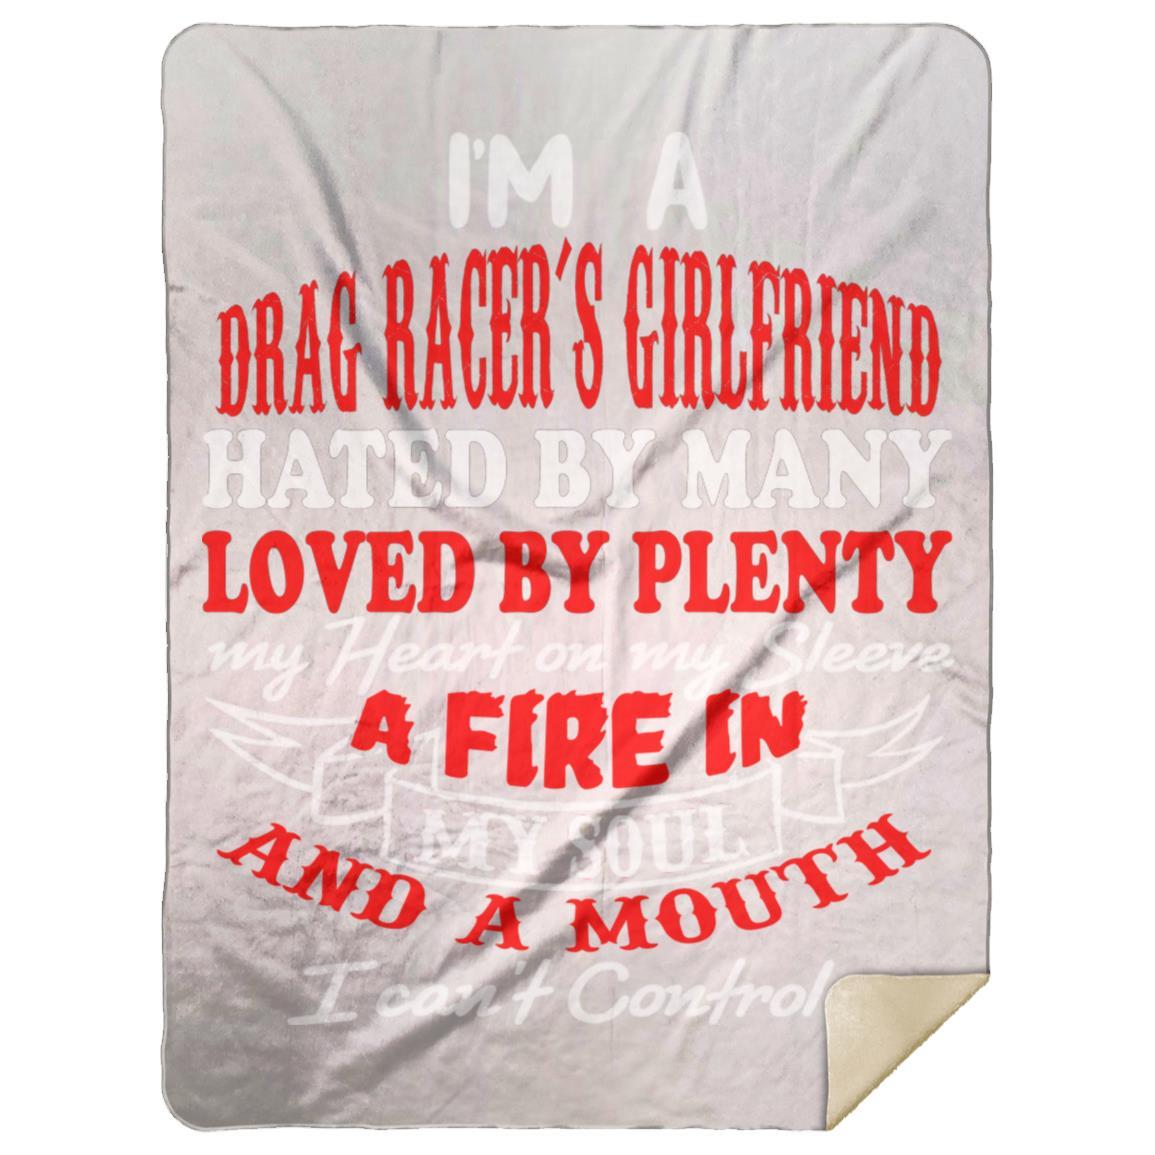 I'm A Drag Racer's Girlfriend Hated By Many Loved By Plenty Premium Mink Sherpa Blanket 60x80